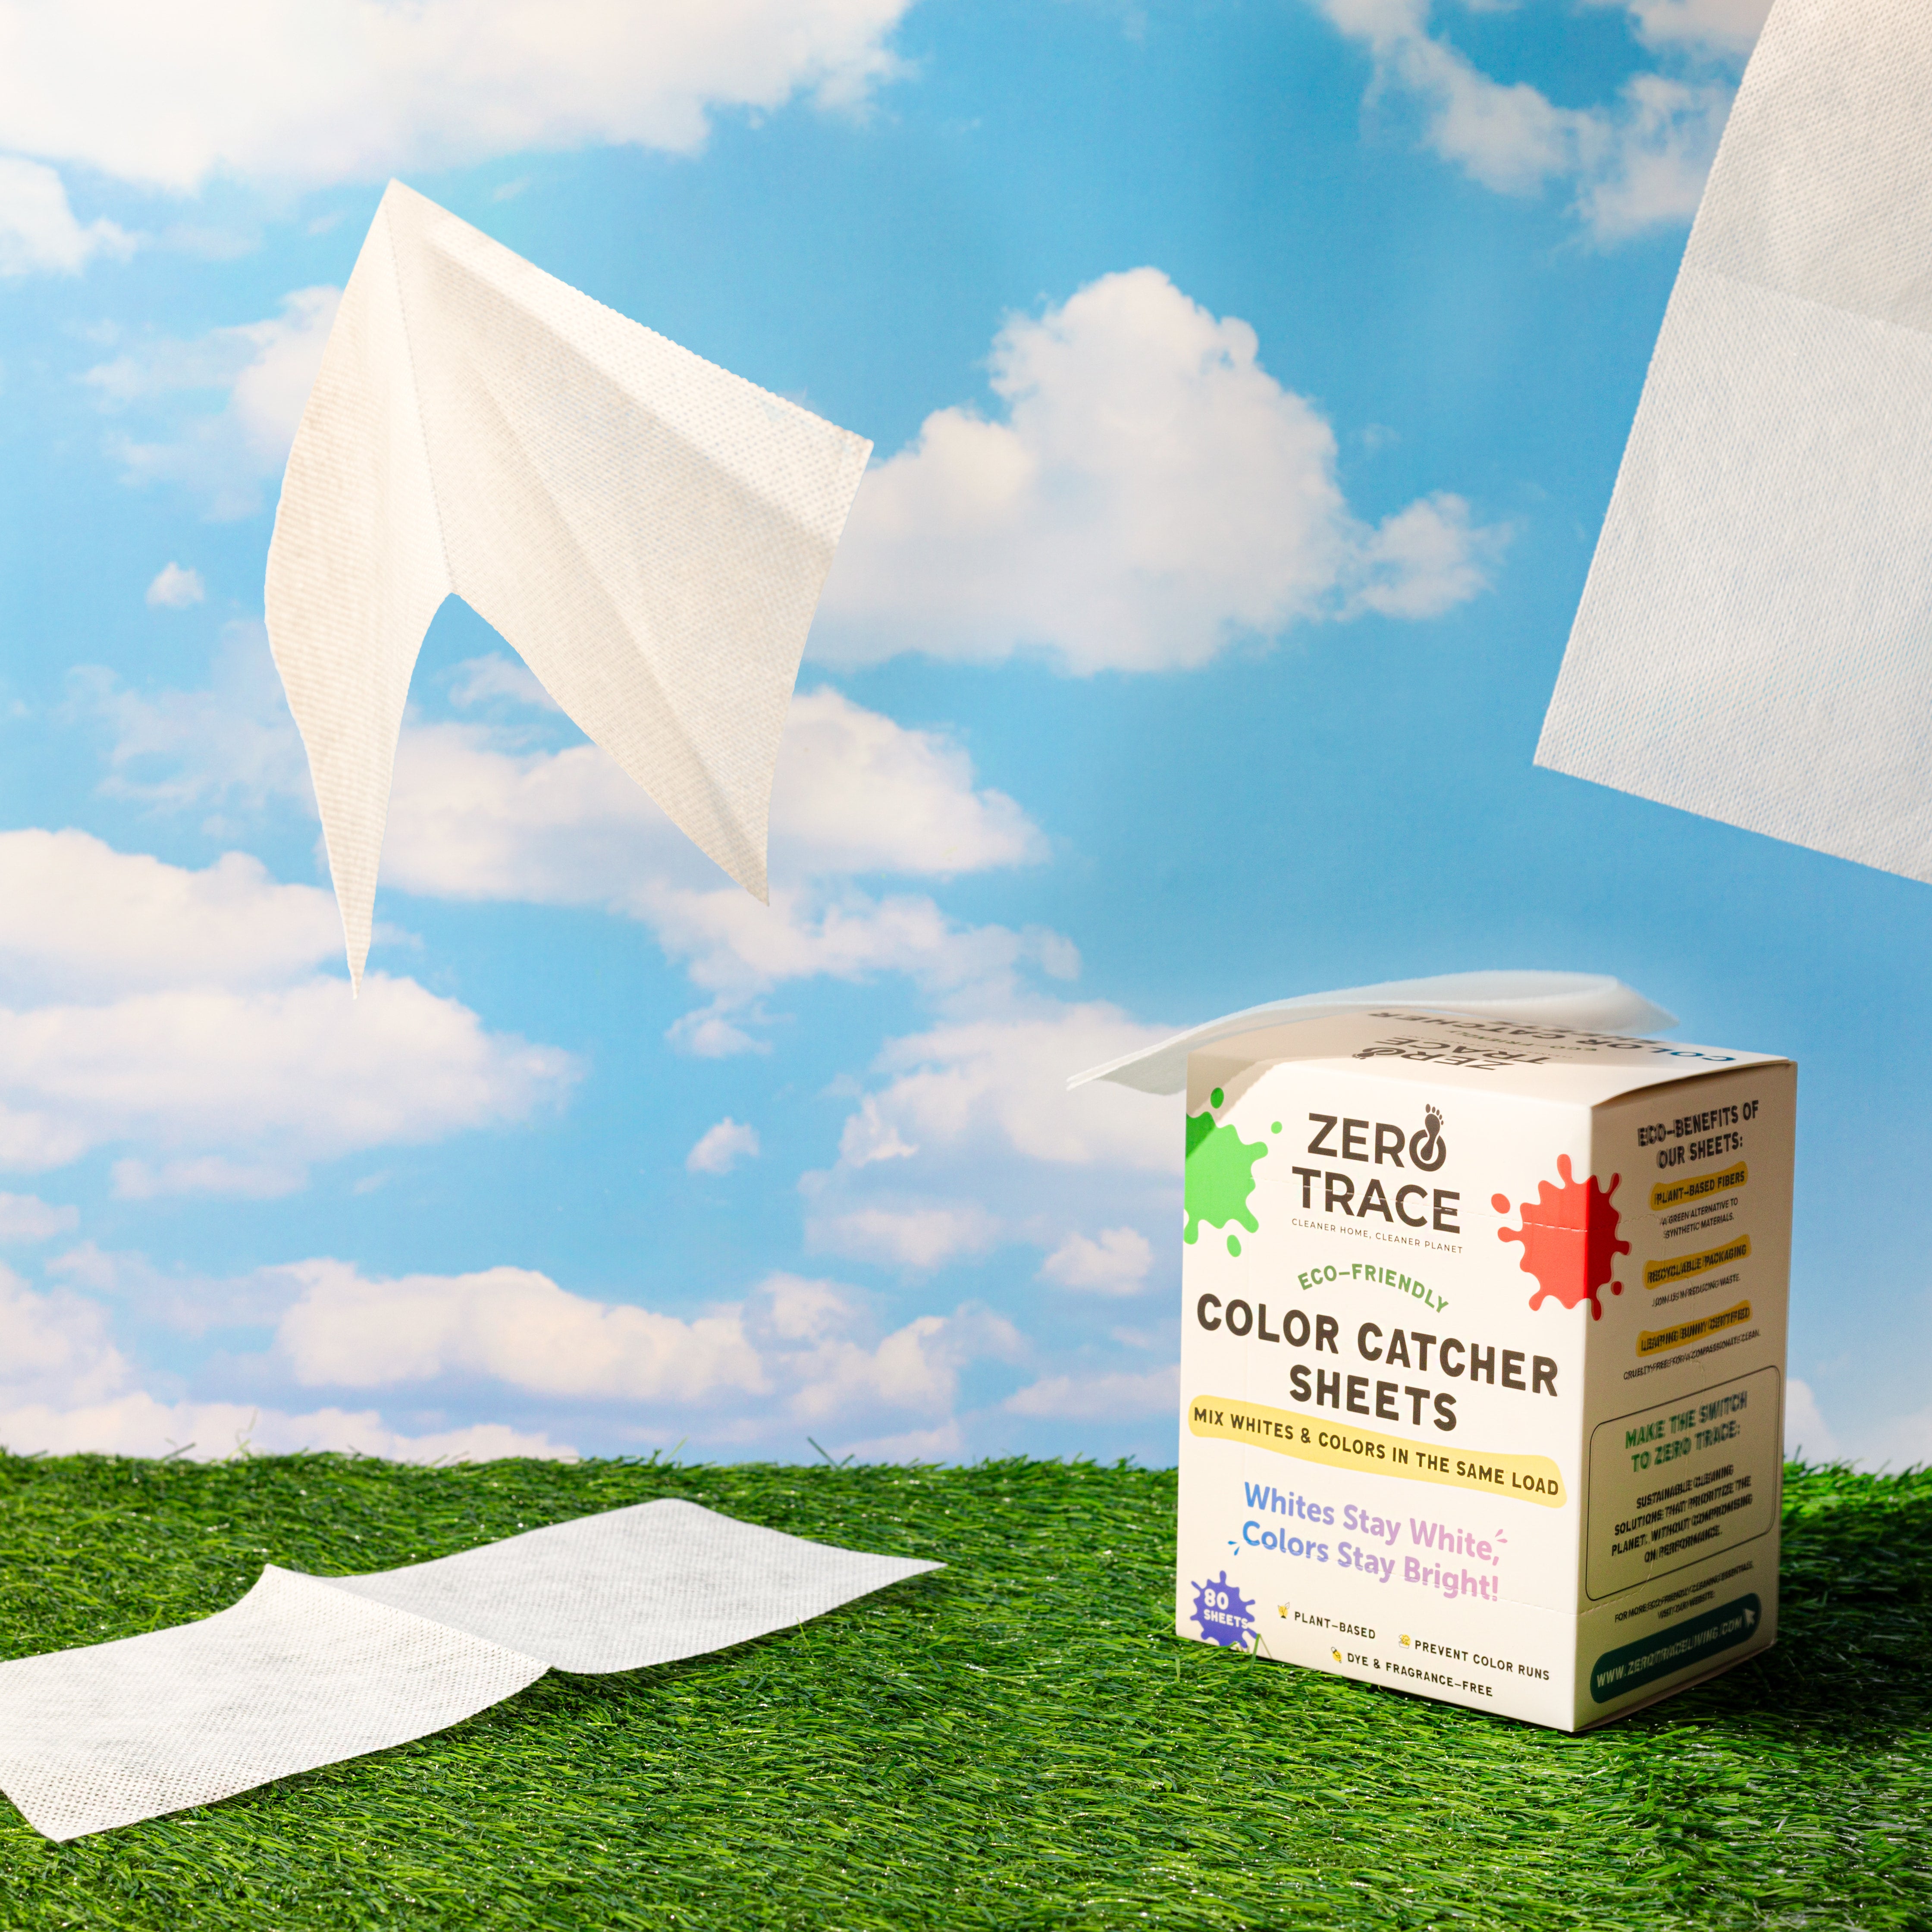 A Zero Trace colorfully wrapped box of Color Catcher Sheets on a grassy field.